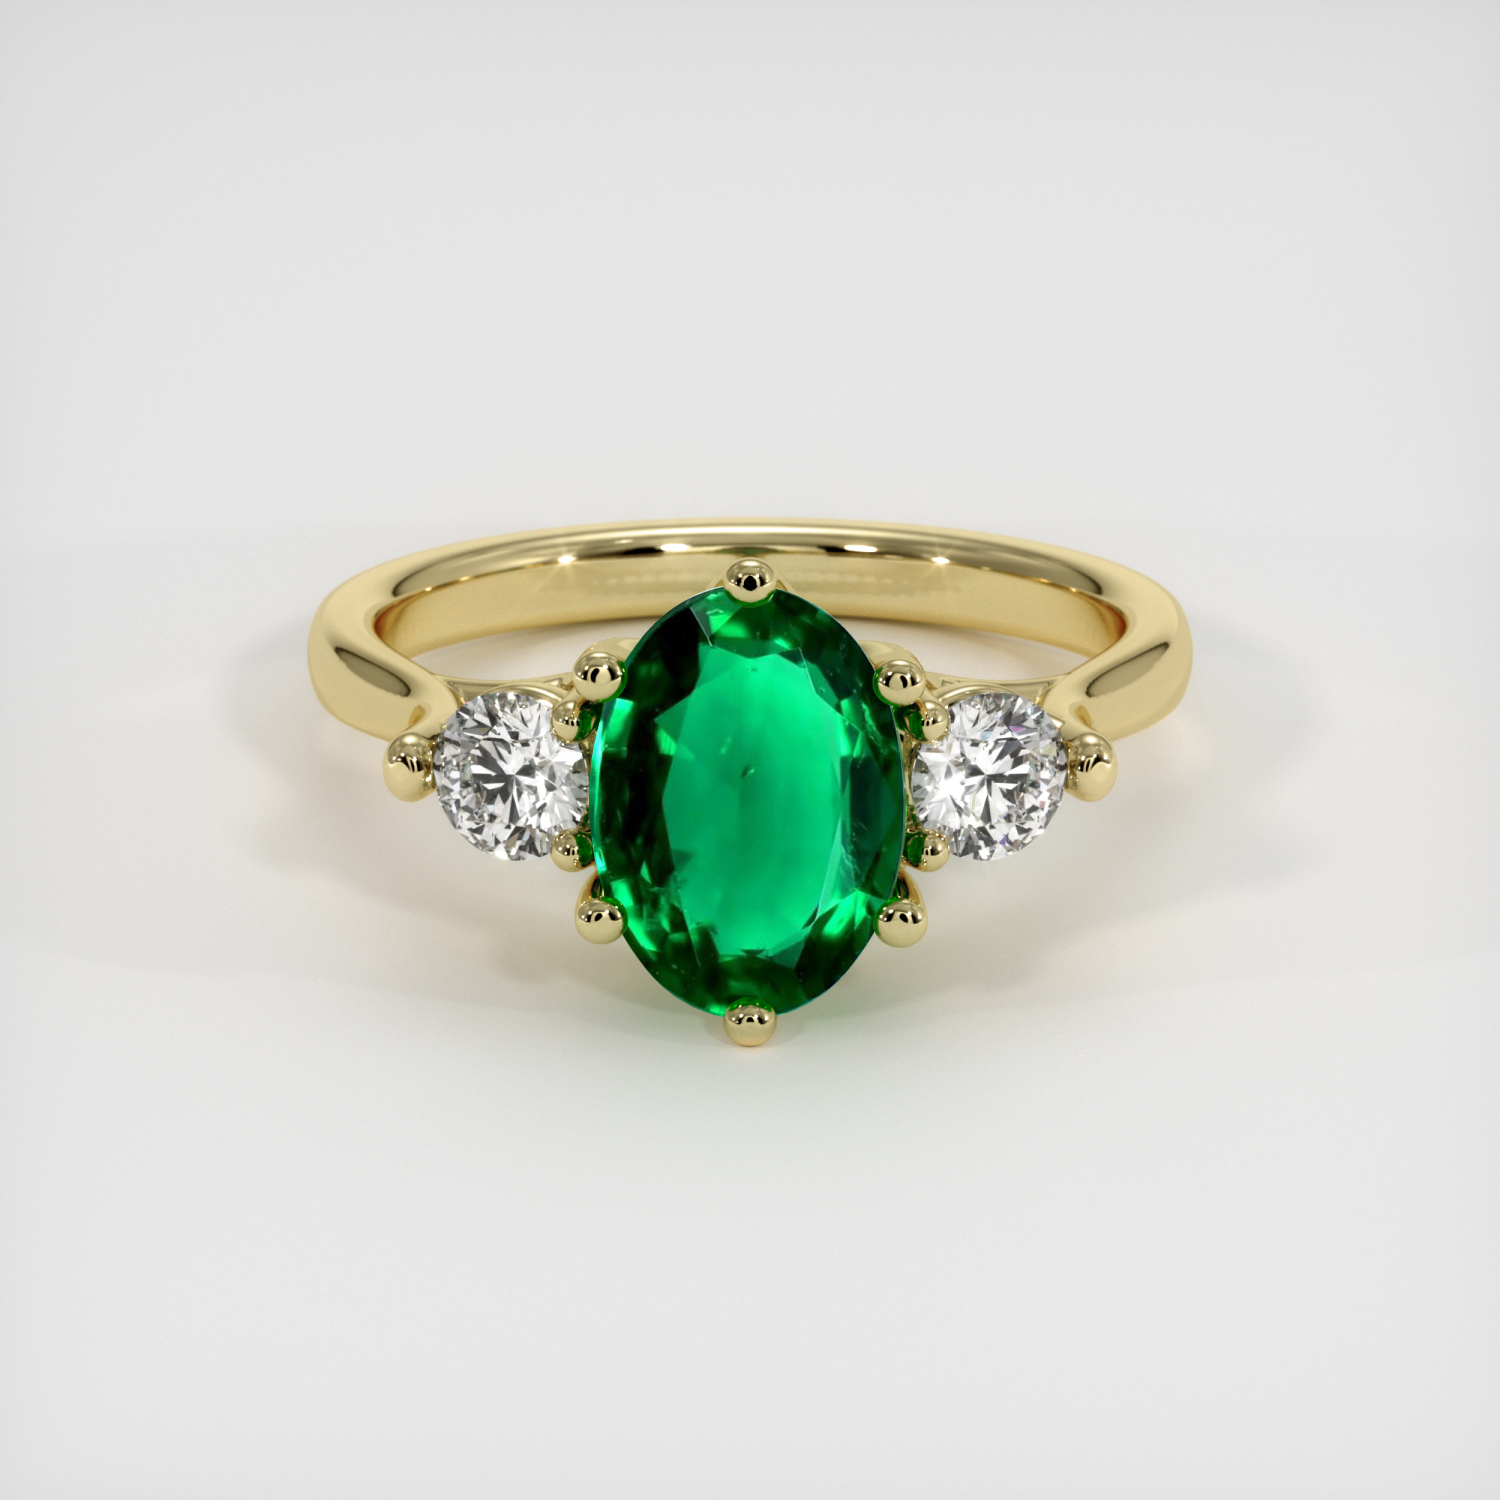 Emerald Ring 1.43 Ct. 18K Yellow Gold | The Natural Emerald Company